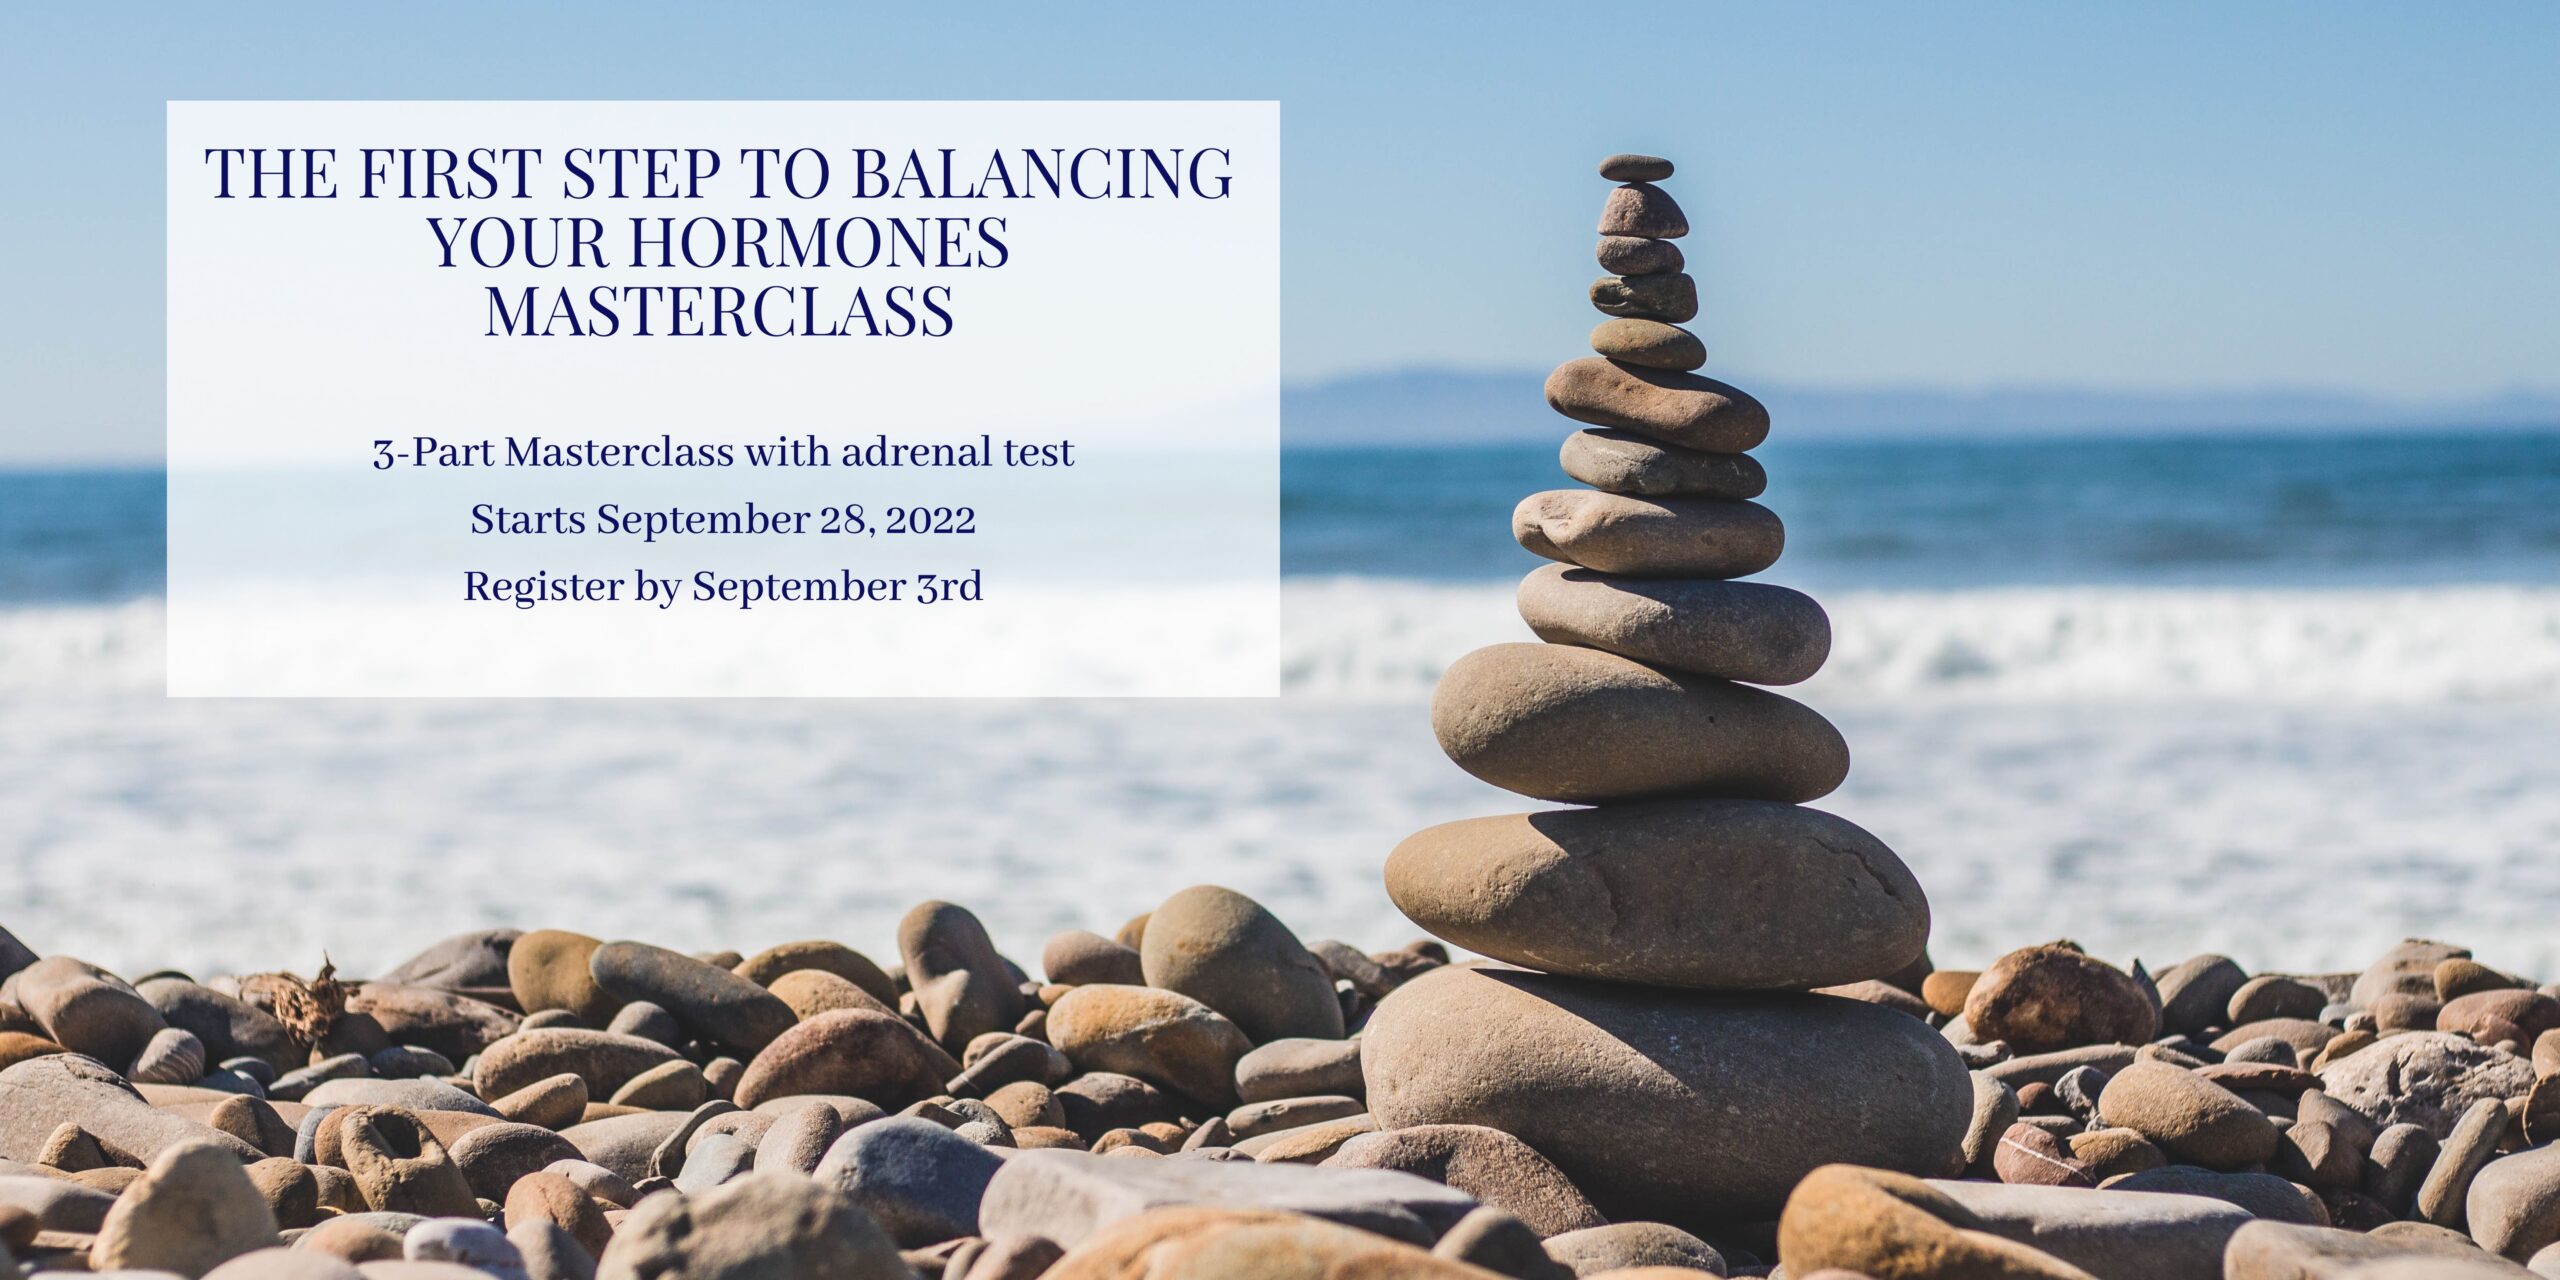 The First Step to Balancing Your Hormones Masterclass